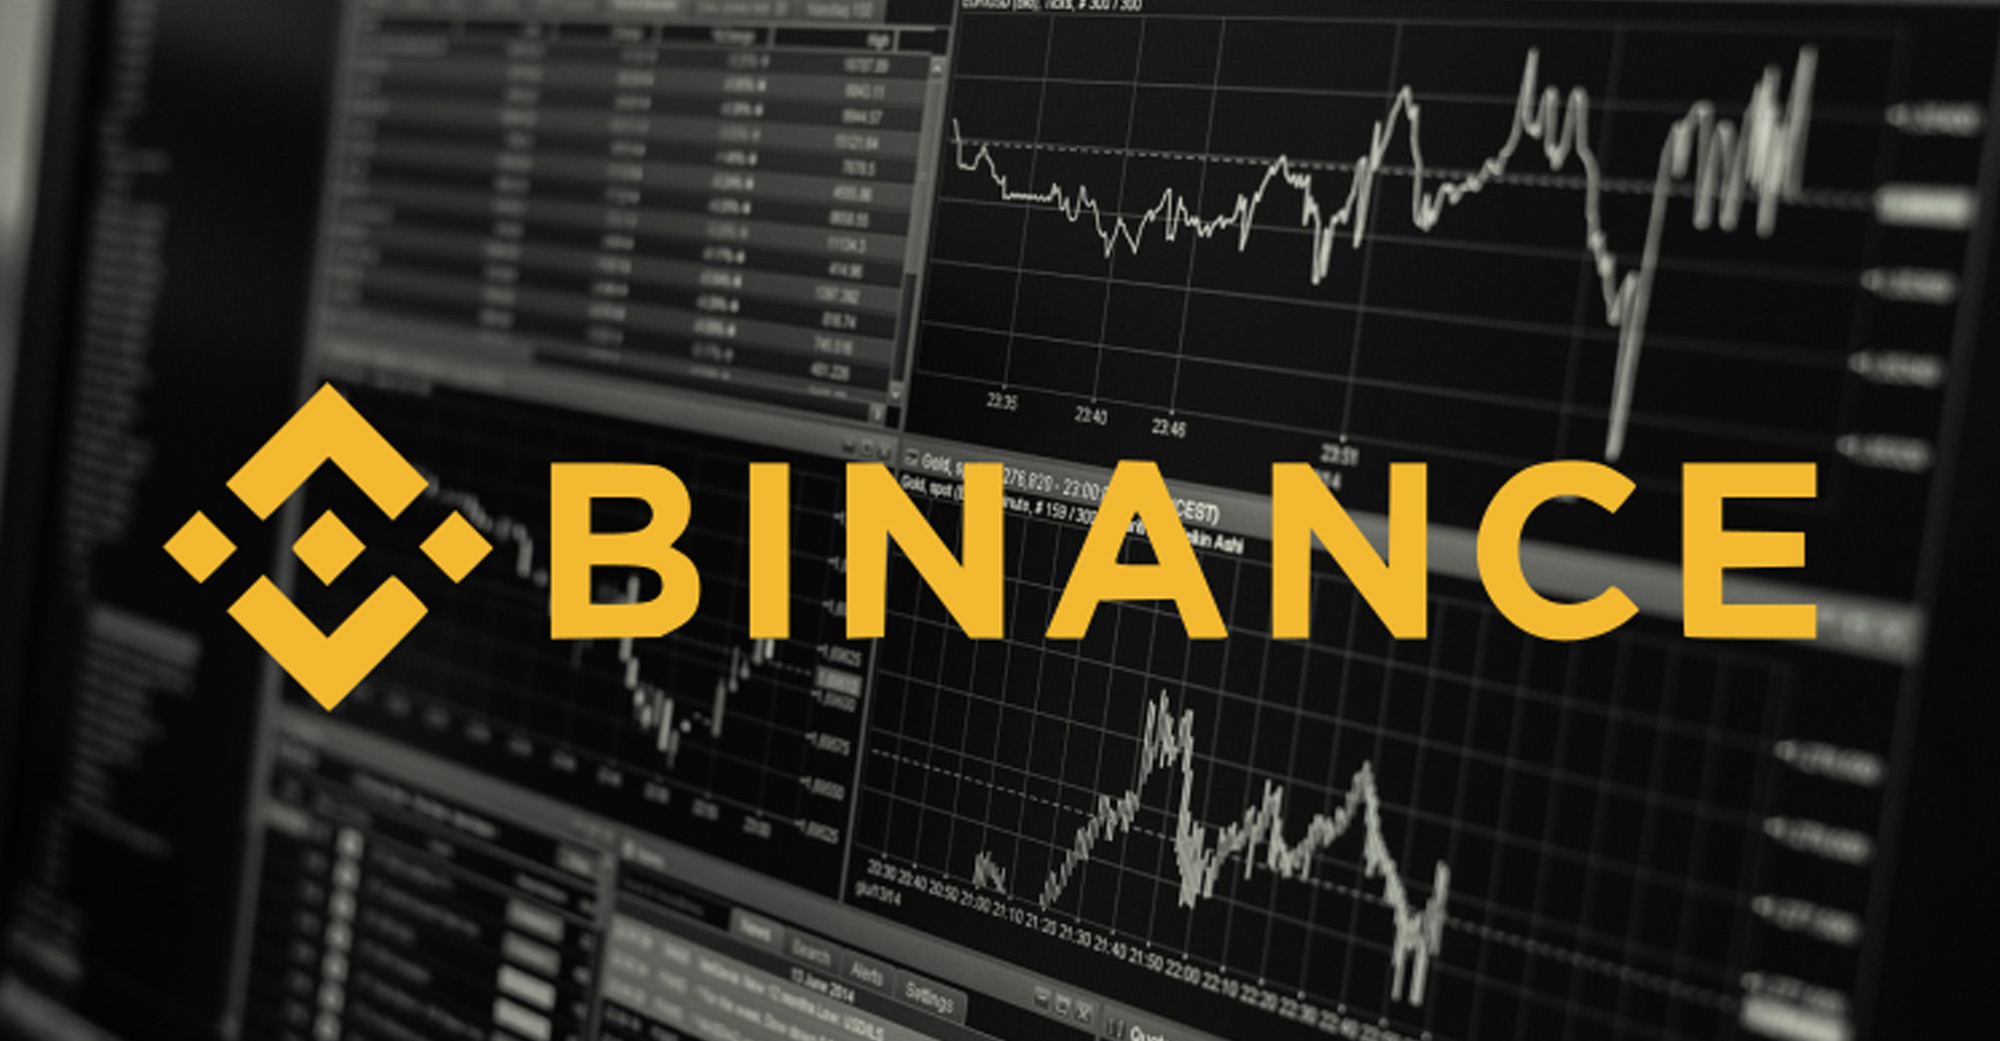 Binance Immense XRP Holdings Exposed In Detailed Proof of Reserves Report